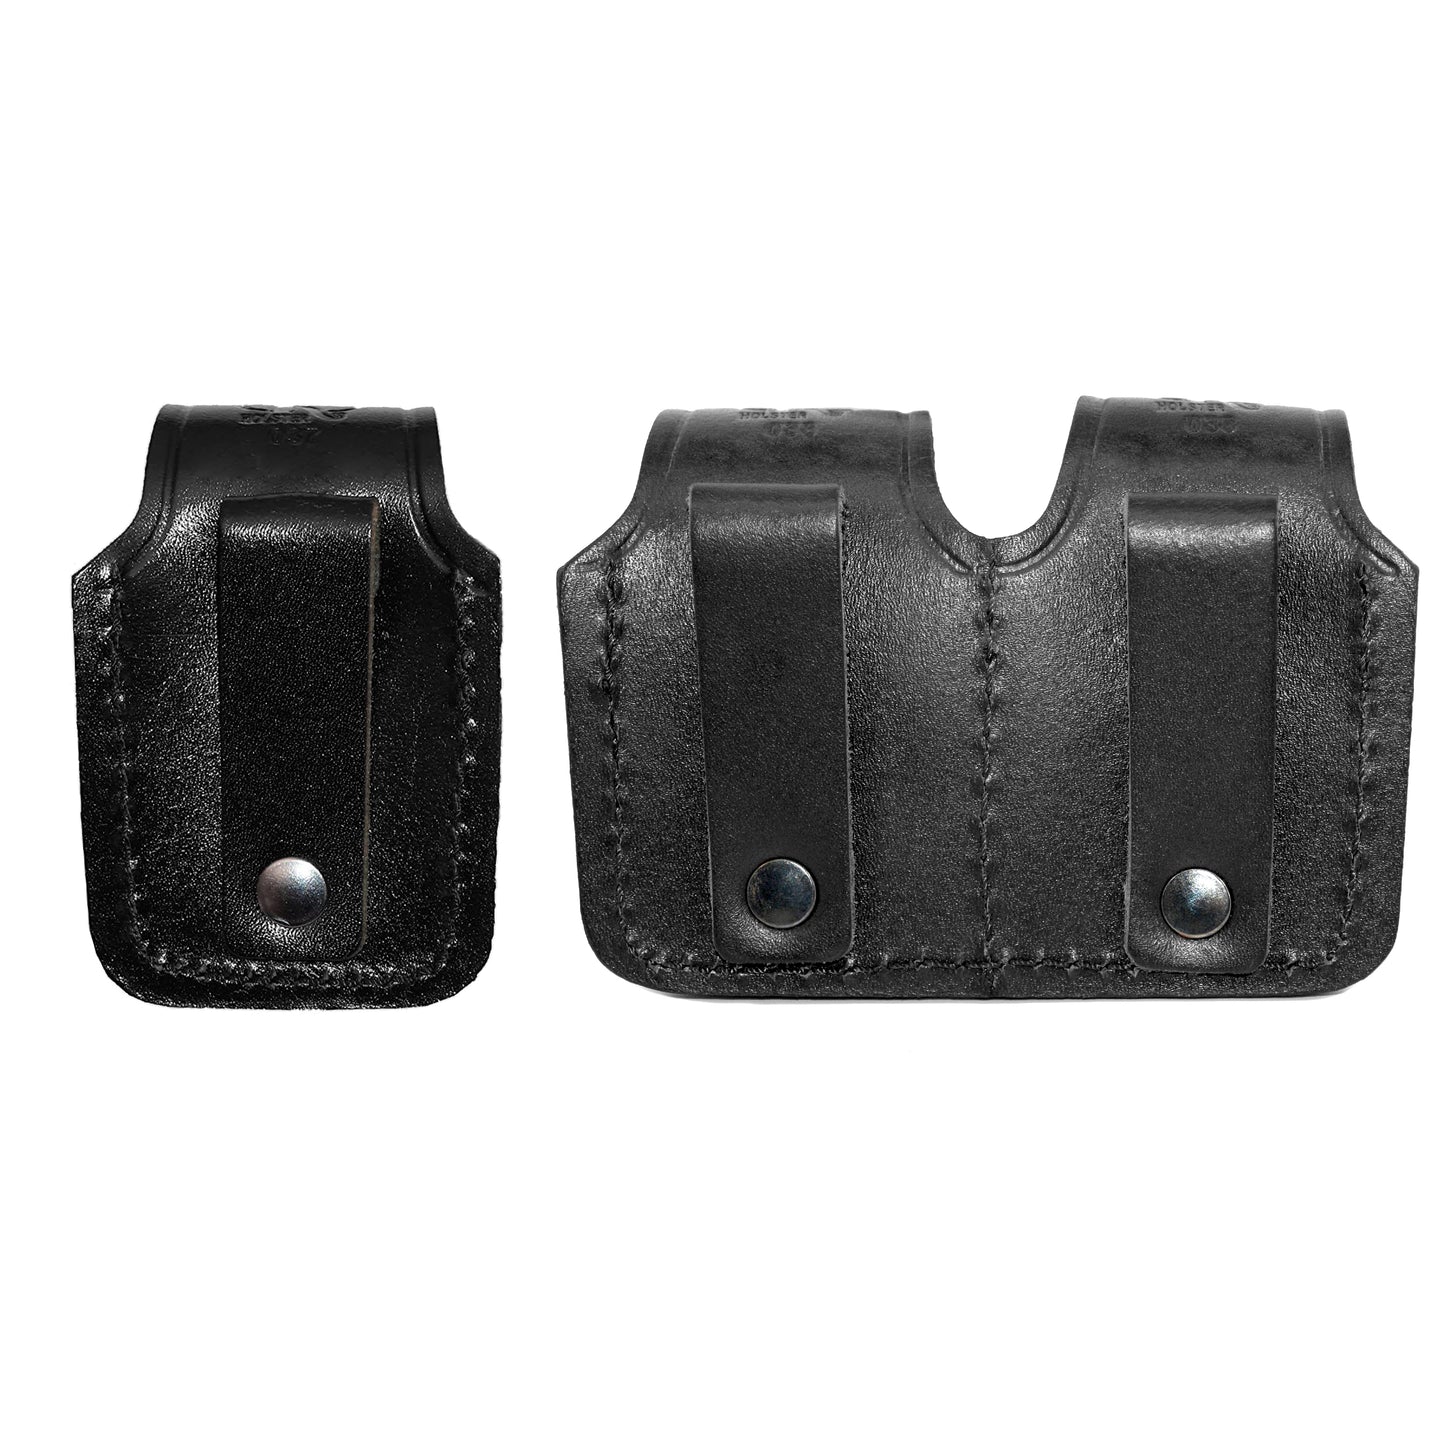 ALS3738 Single & Double Speedloader Pouch for 357 Magnum 6 & 7 Shots, 44 Magnum 5 Shot, S&W .38 Special 6 Shot speedloaders Genuine Leather Handmade!